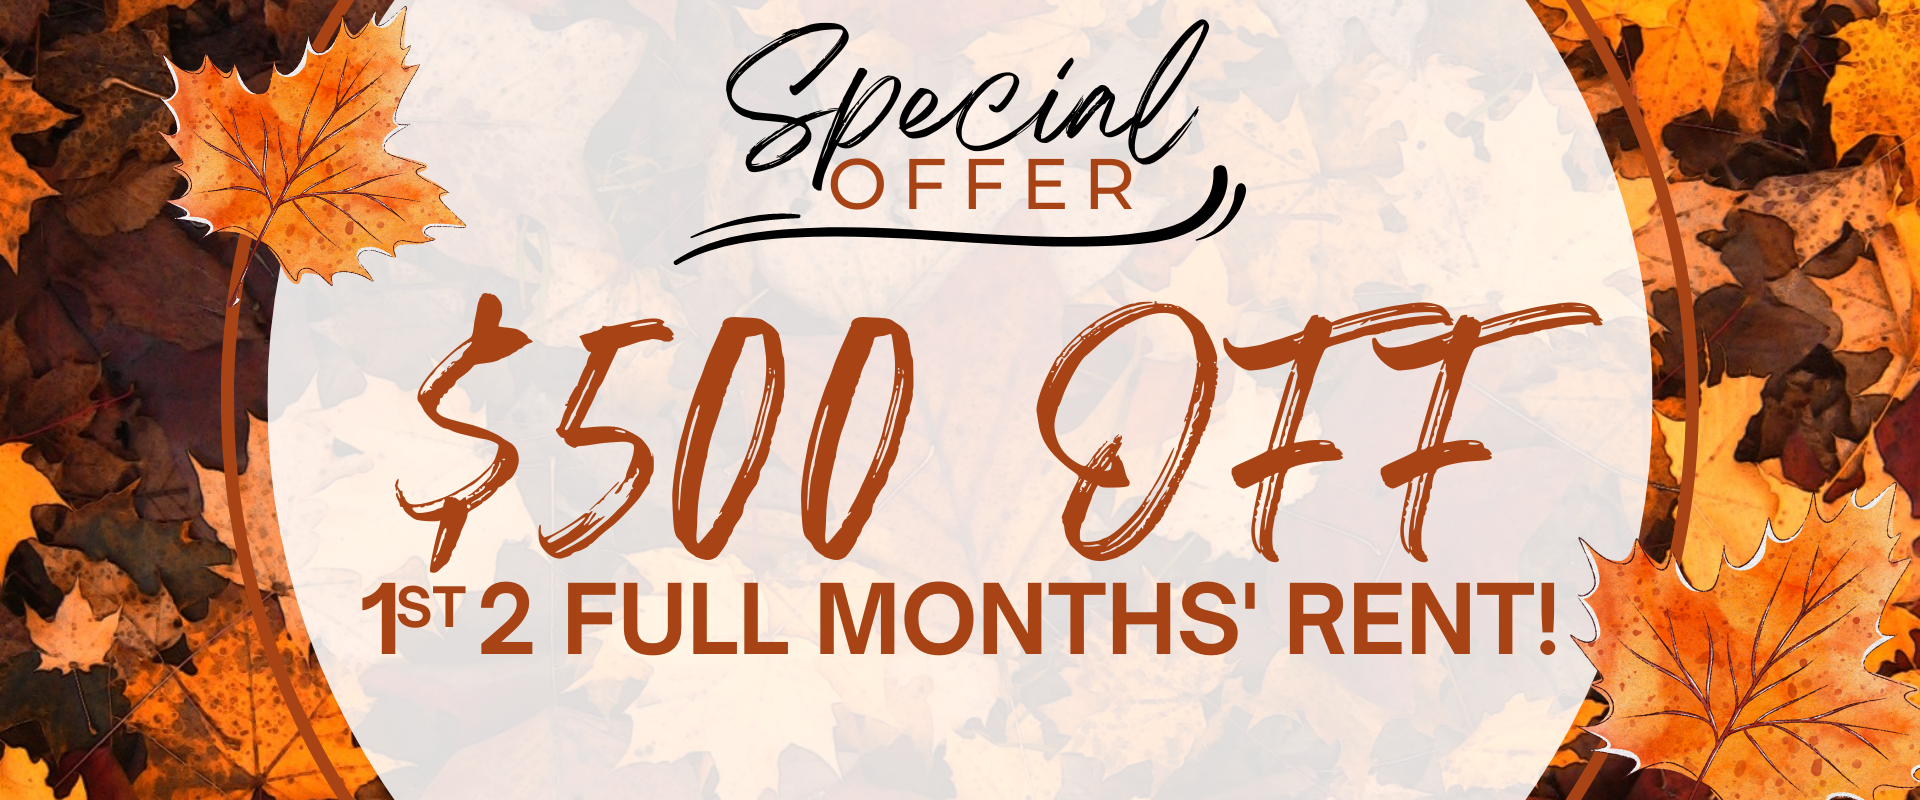 Limited-Time Offers for New Move-ins!*
$300 off 1st month rent!
Waived App fee after move-in
50% off hold/admin fee after move-in
*Contact us for more details!